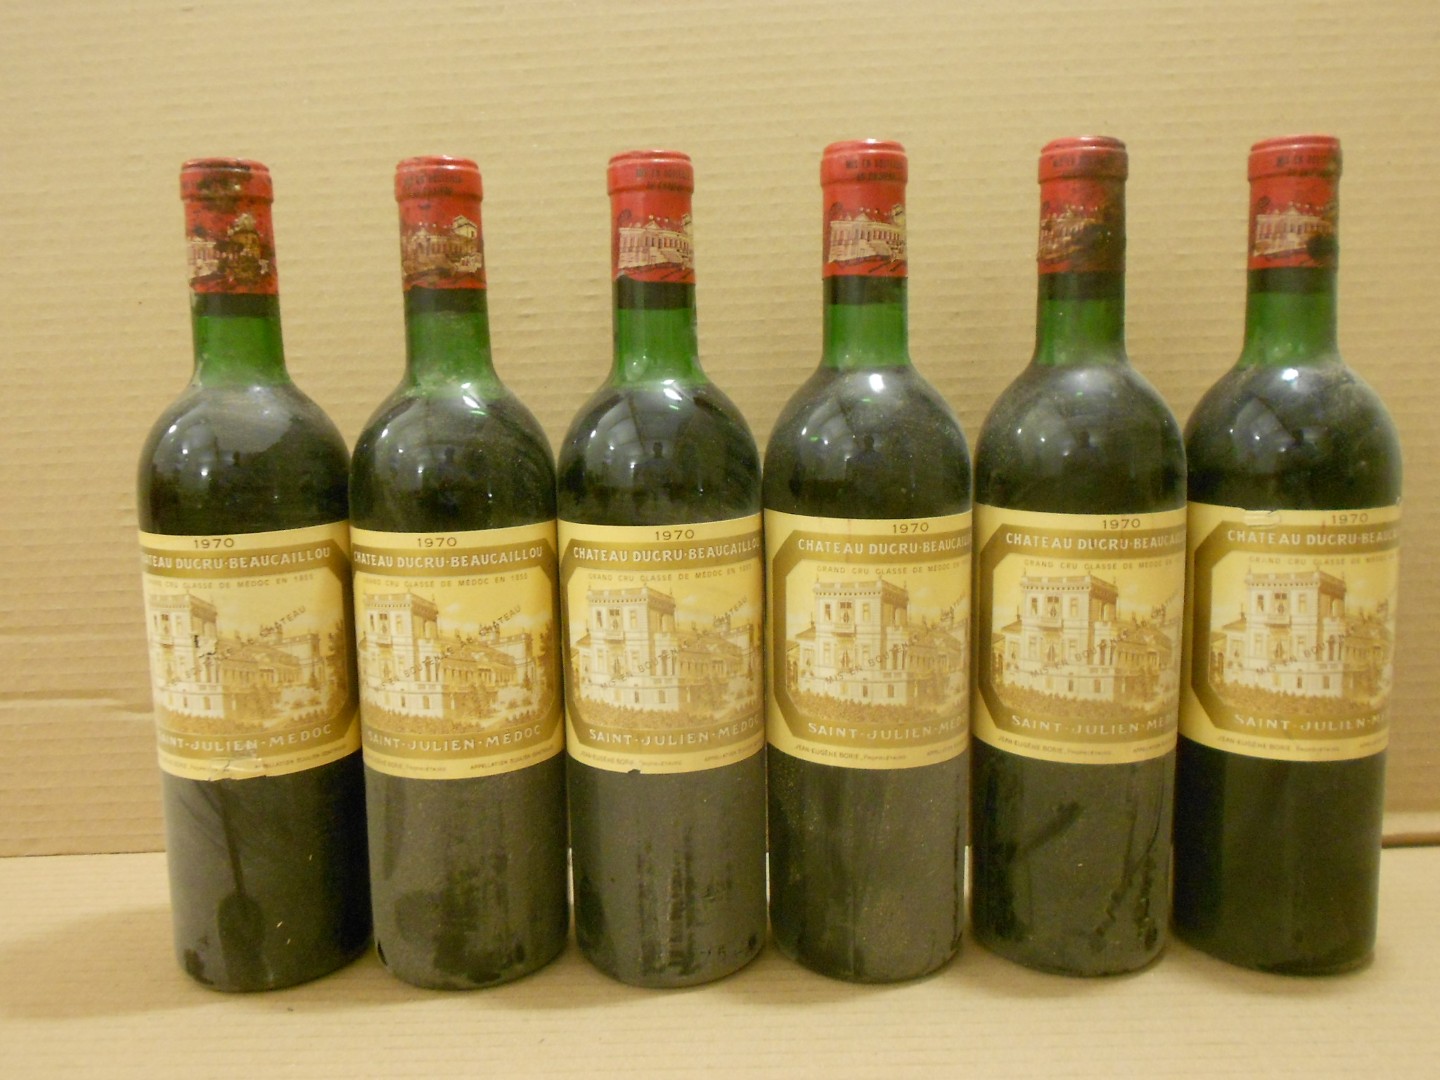 Chateau Ducru Beaucaillou, St Julien 2eme Cru 1970, twelve bottles. Removed from a college cellar.